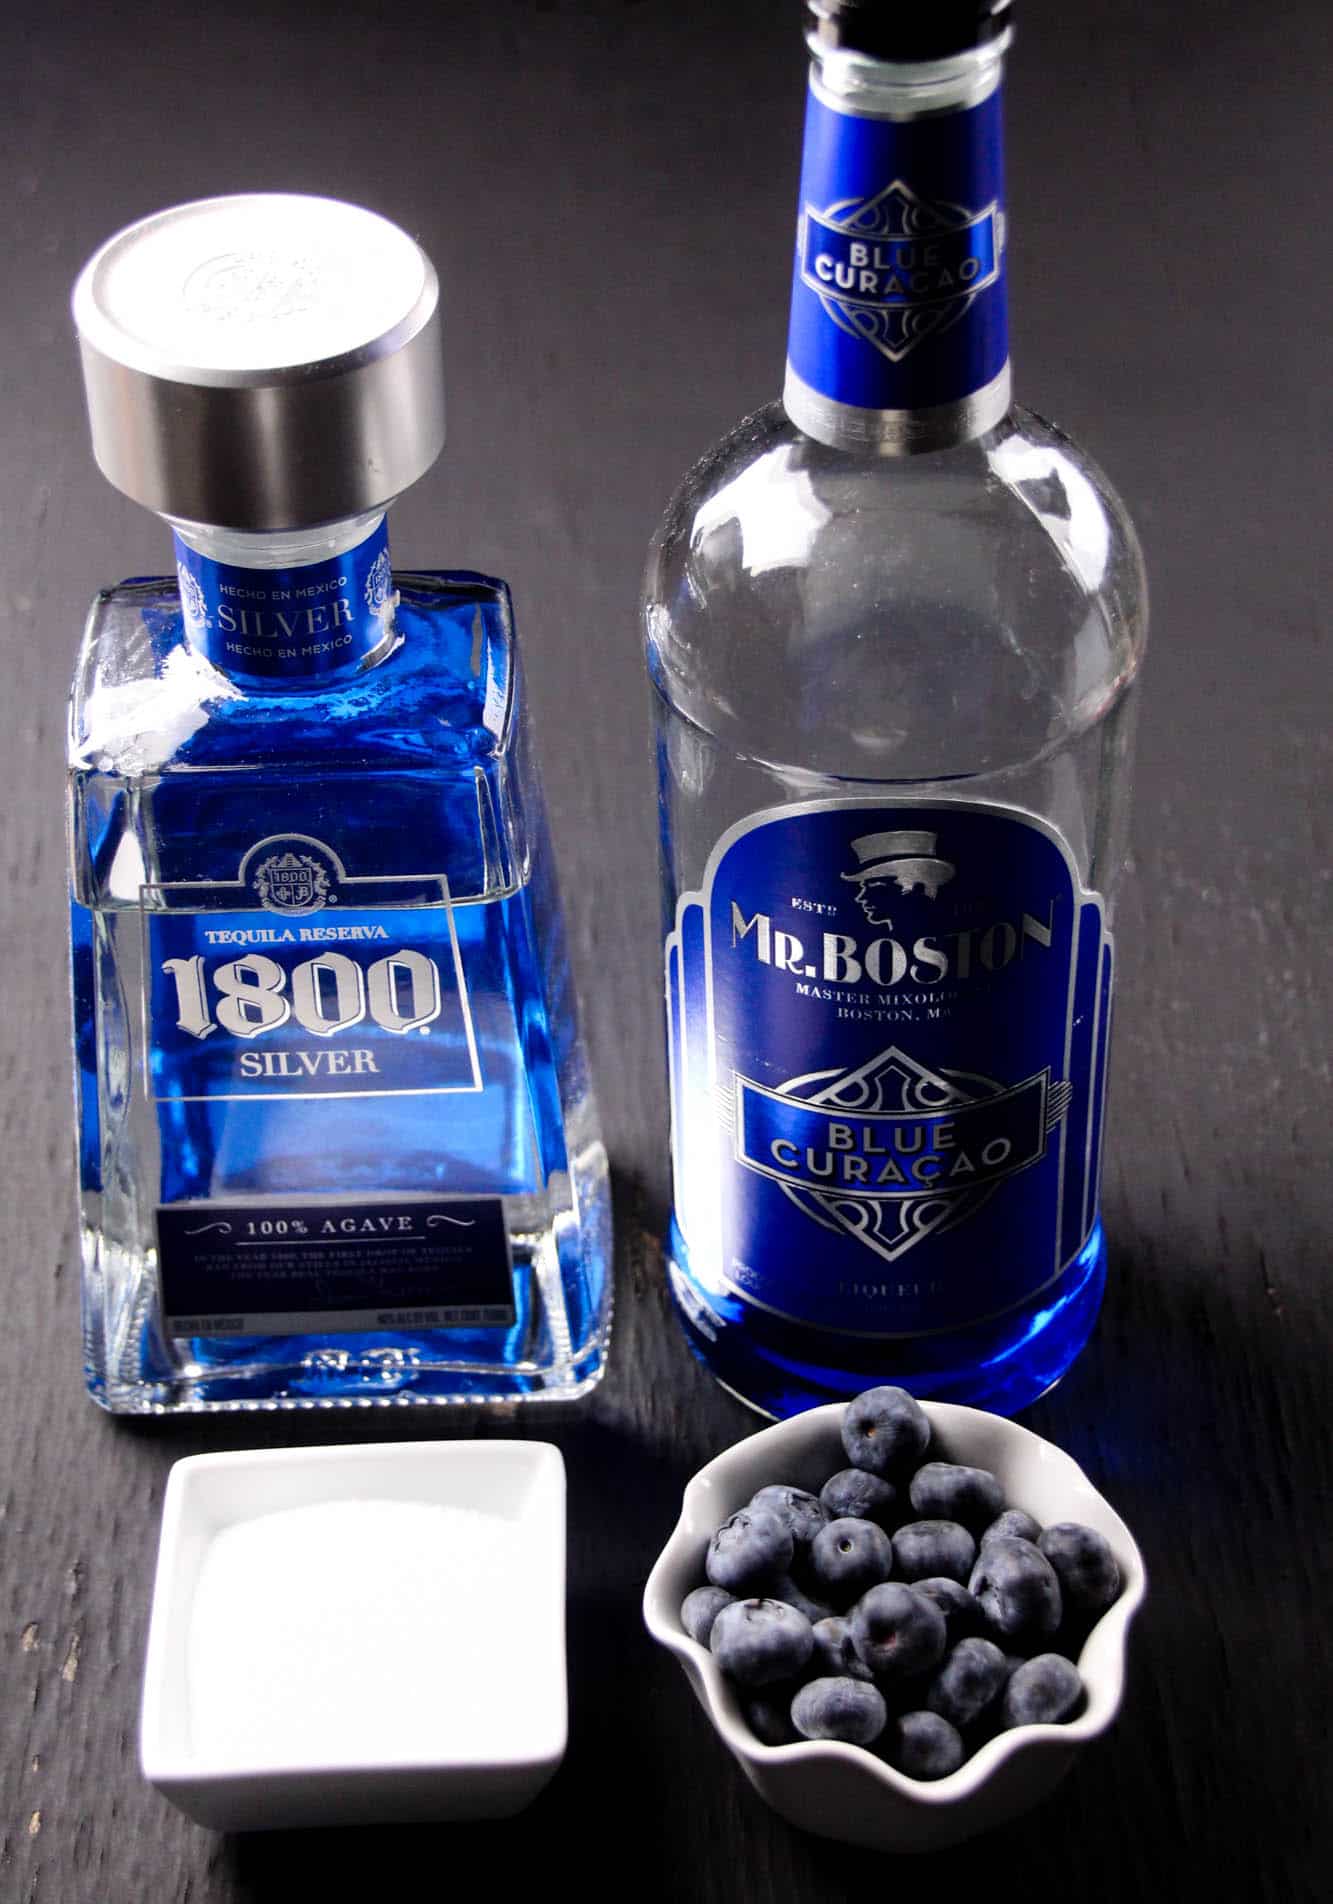 1800 silver tequila, Mr. Boston blue curacao, sugar, and blueberries